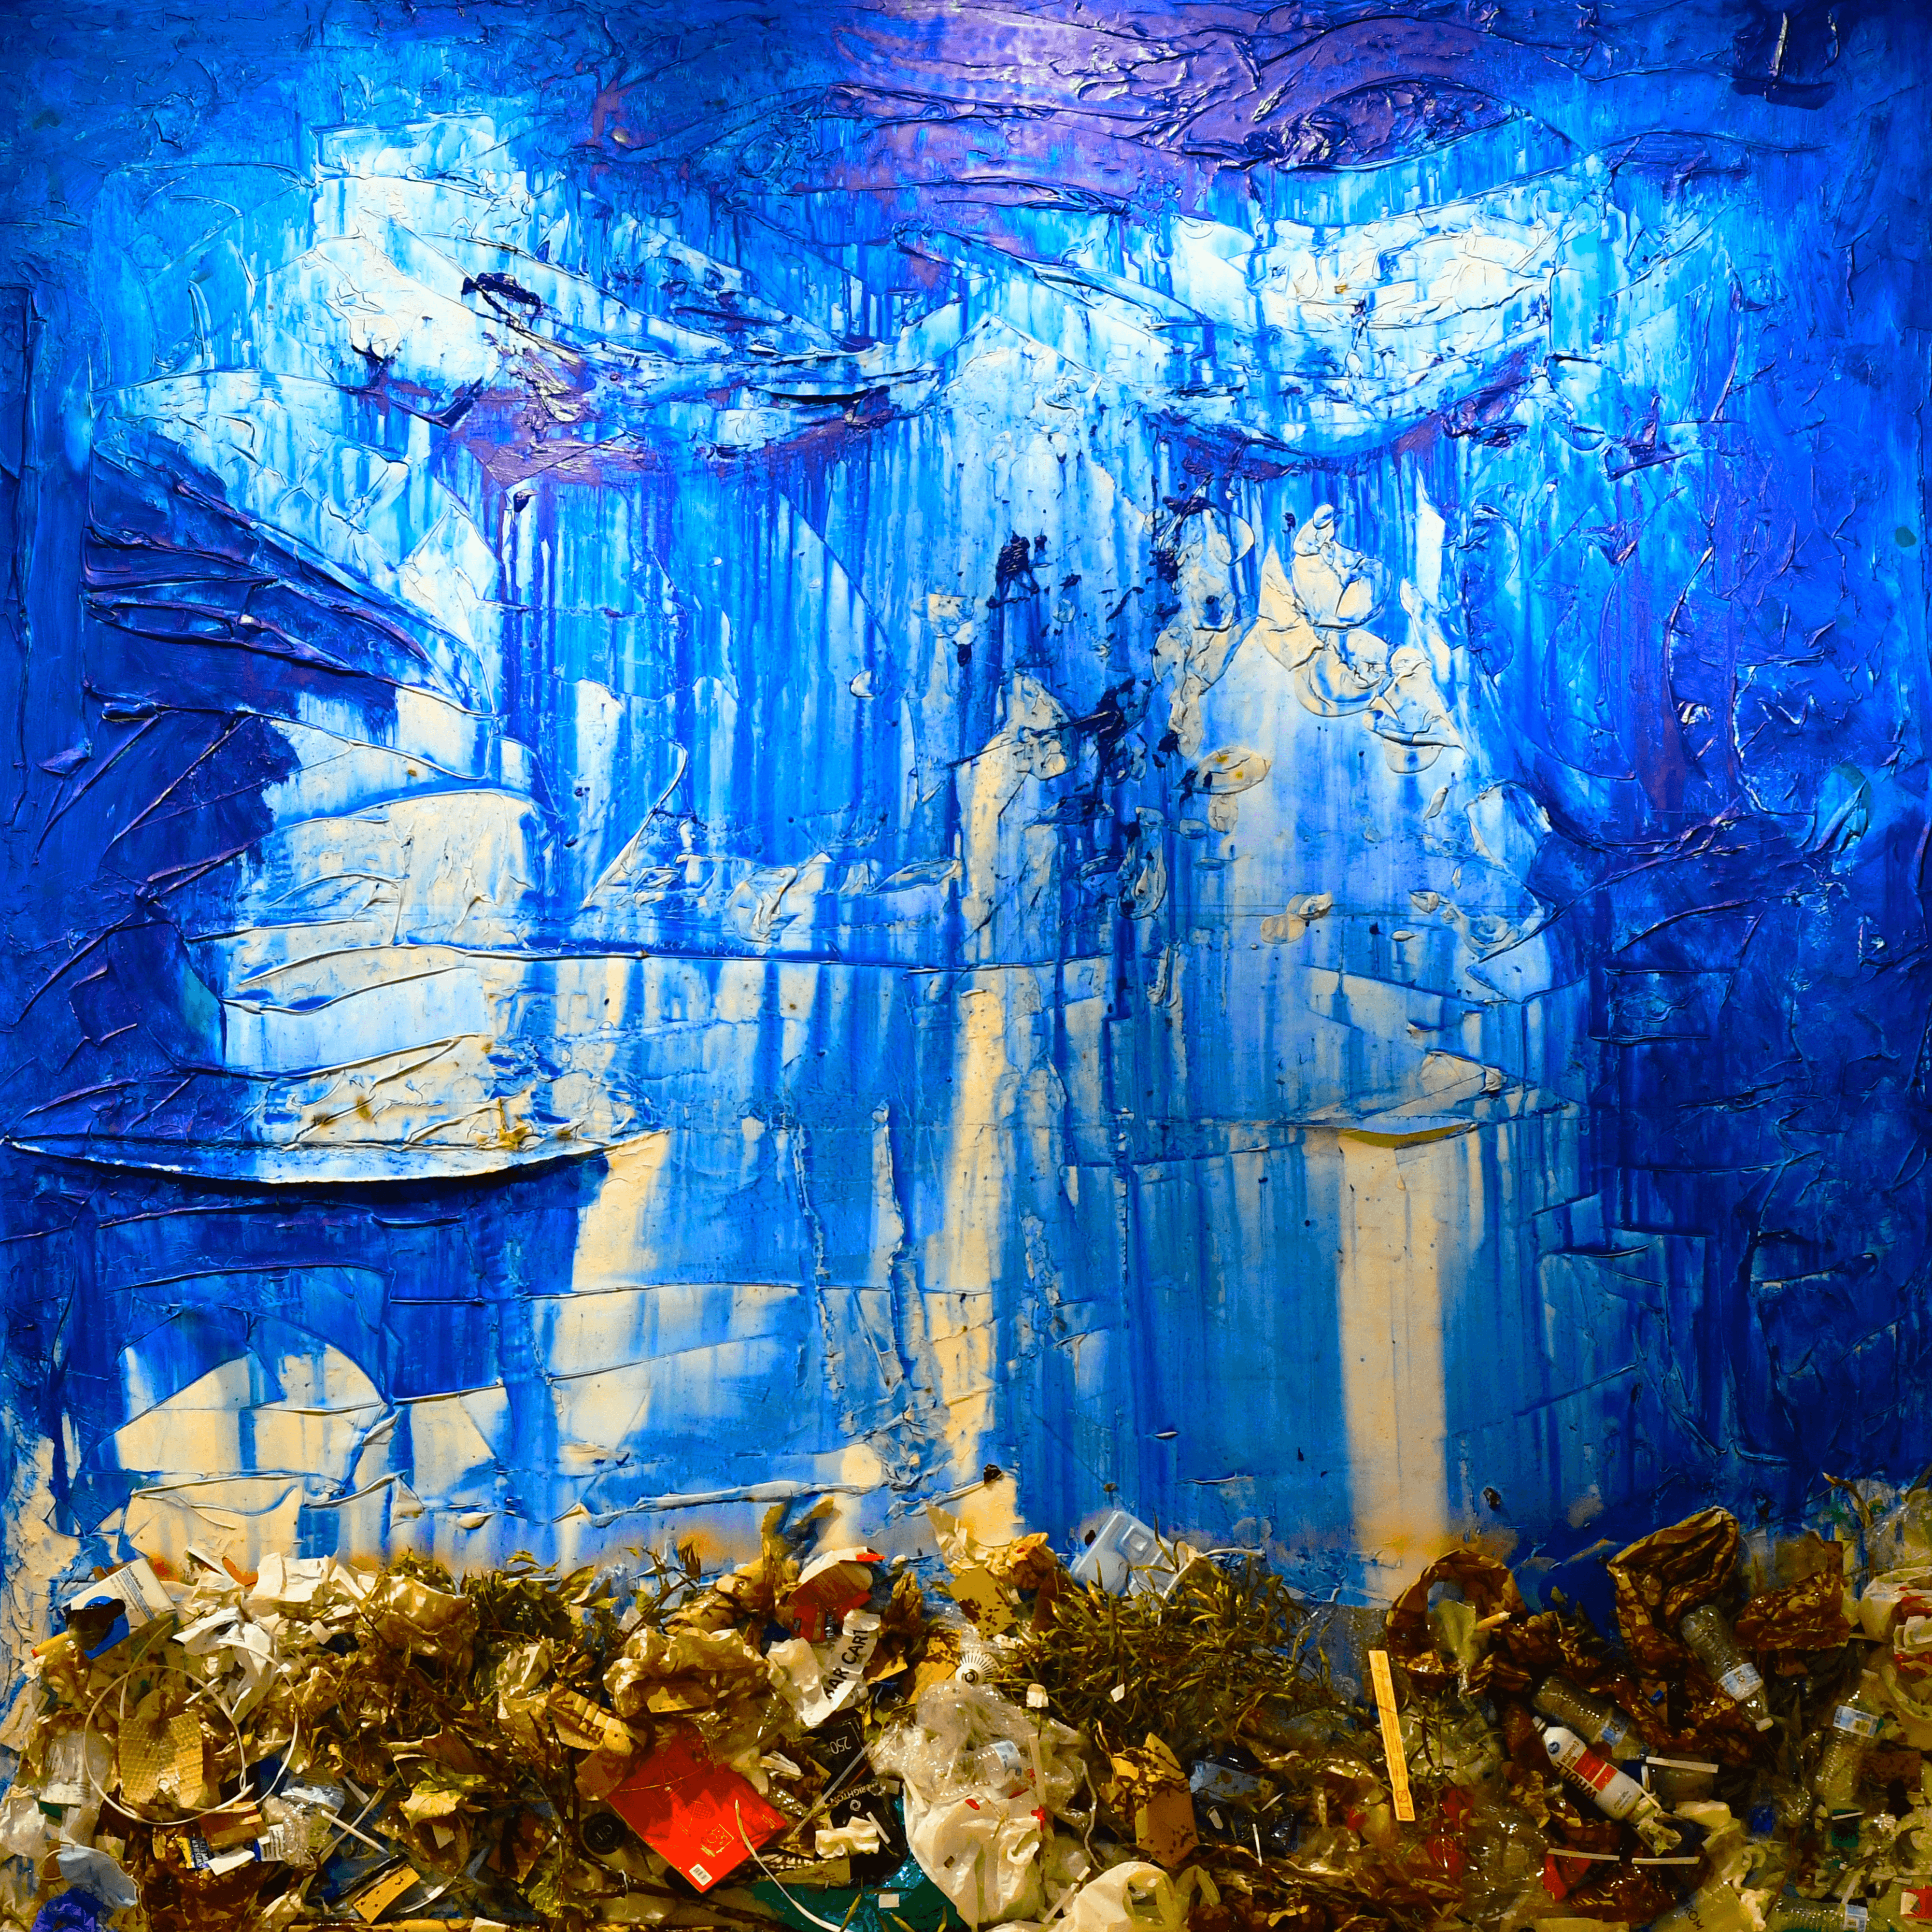 "Mother Earth" 12'X12' Mixed Media Oils and Trash